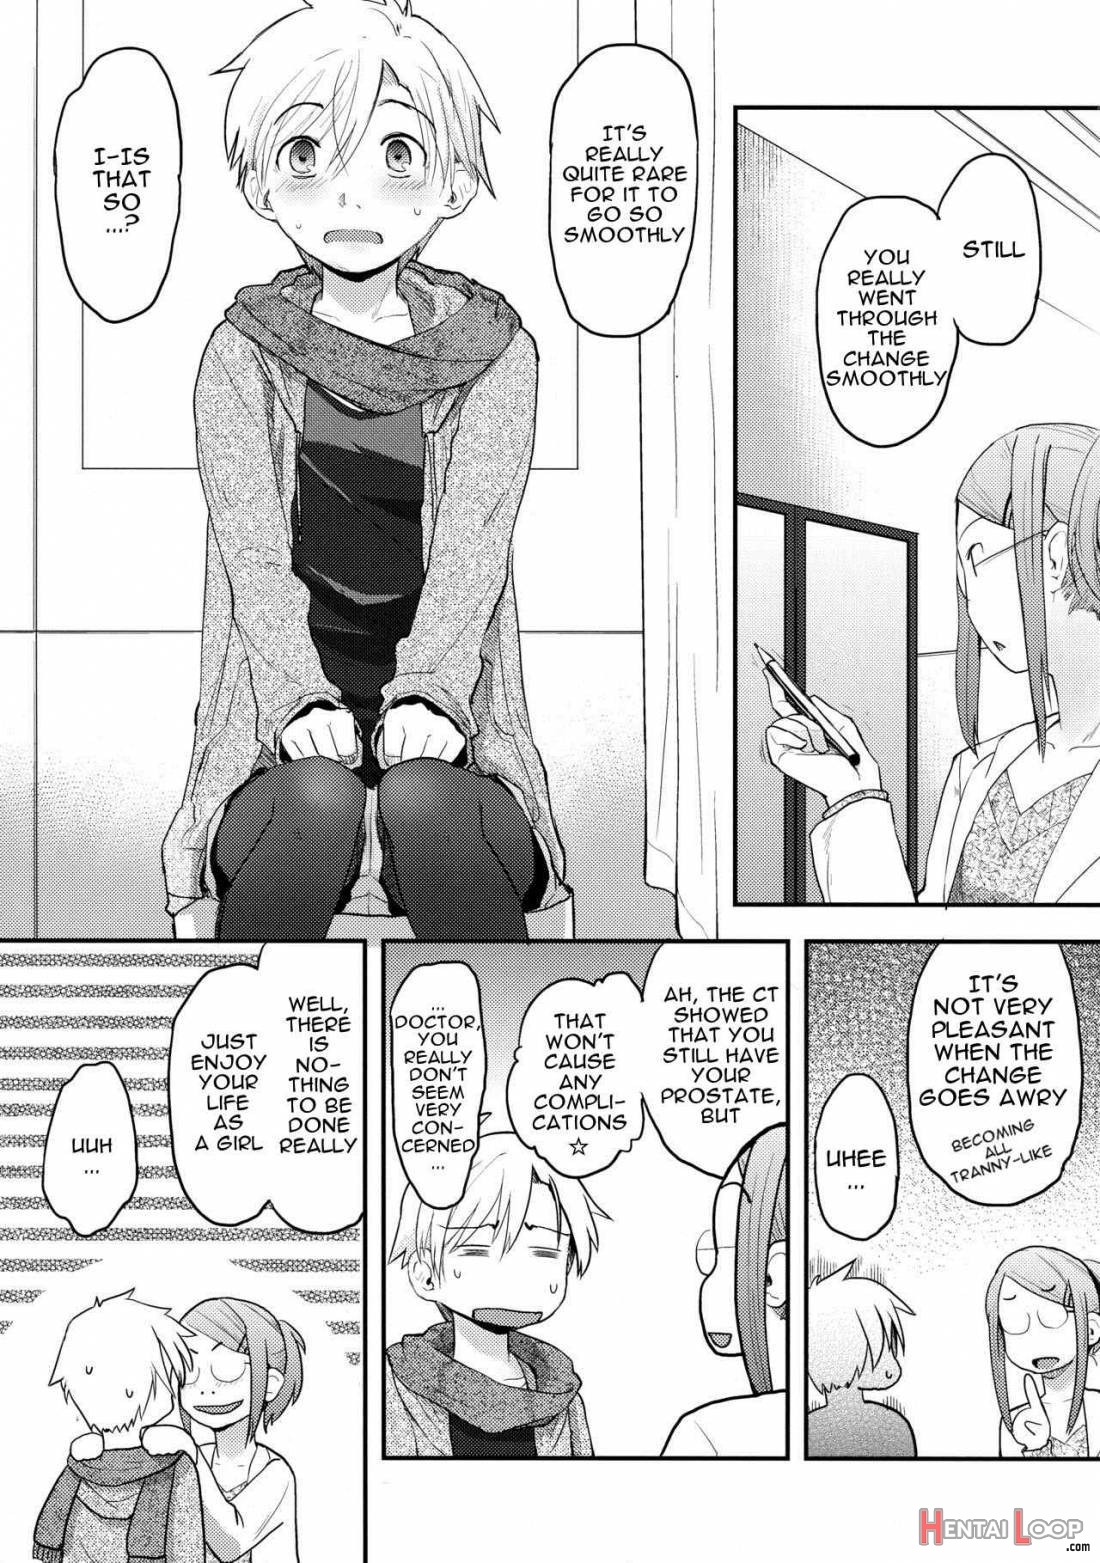 The Story of How My Super Sadistic Girlfriend Tried to Make the Gender-Swapped Me Come With an Electric Massager page 6